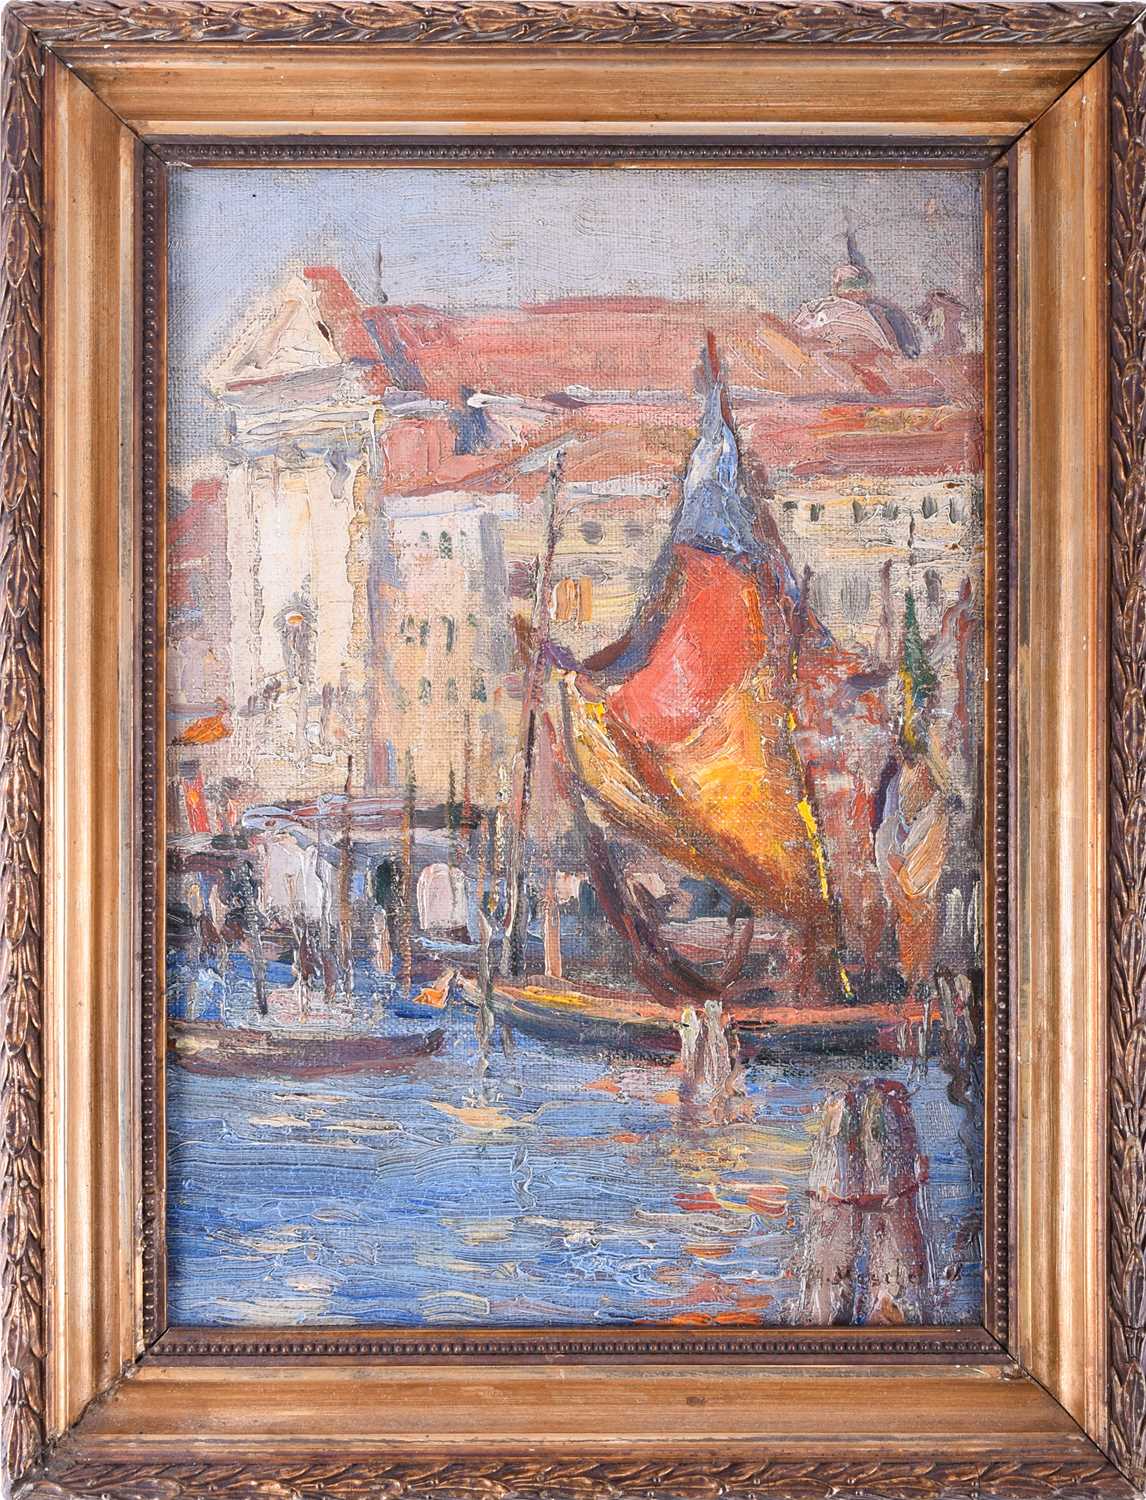 Margaret Moscheles (1871-1924) British, a Venice canal scene, oil on canvas, 31 cm x 22 cm in a gilt